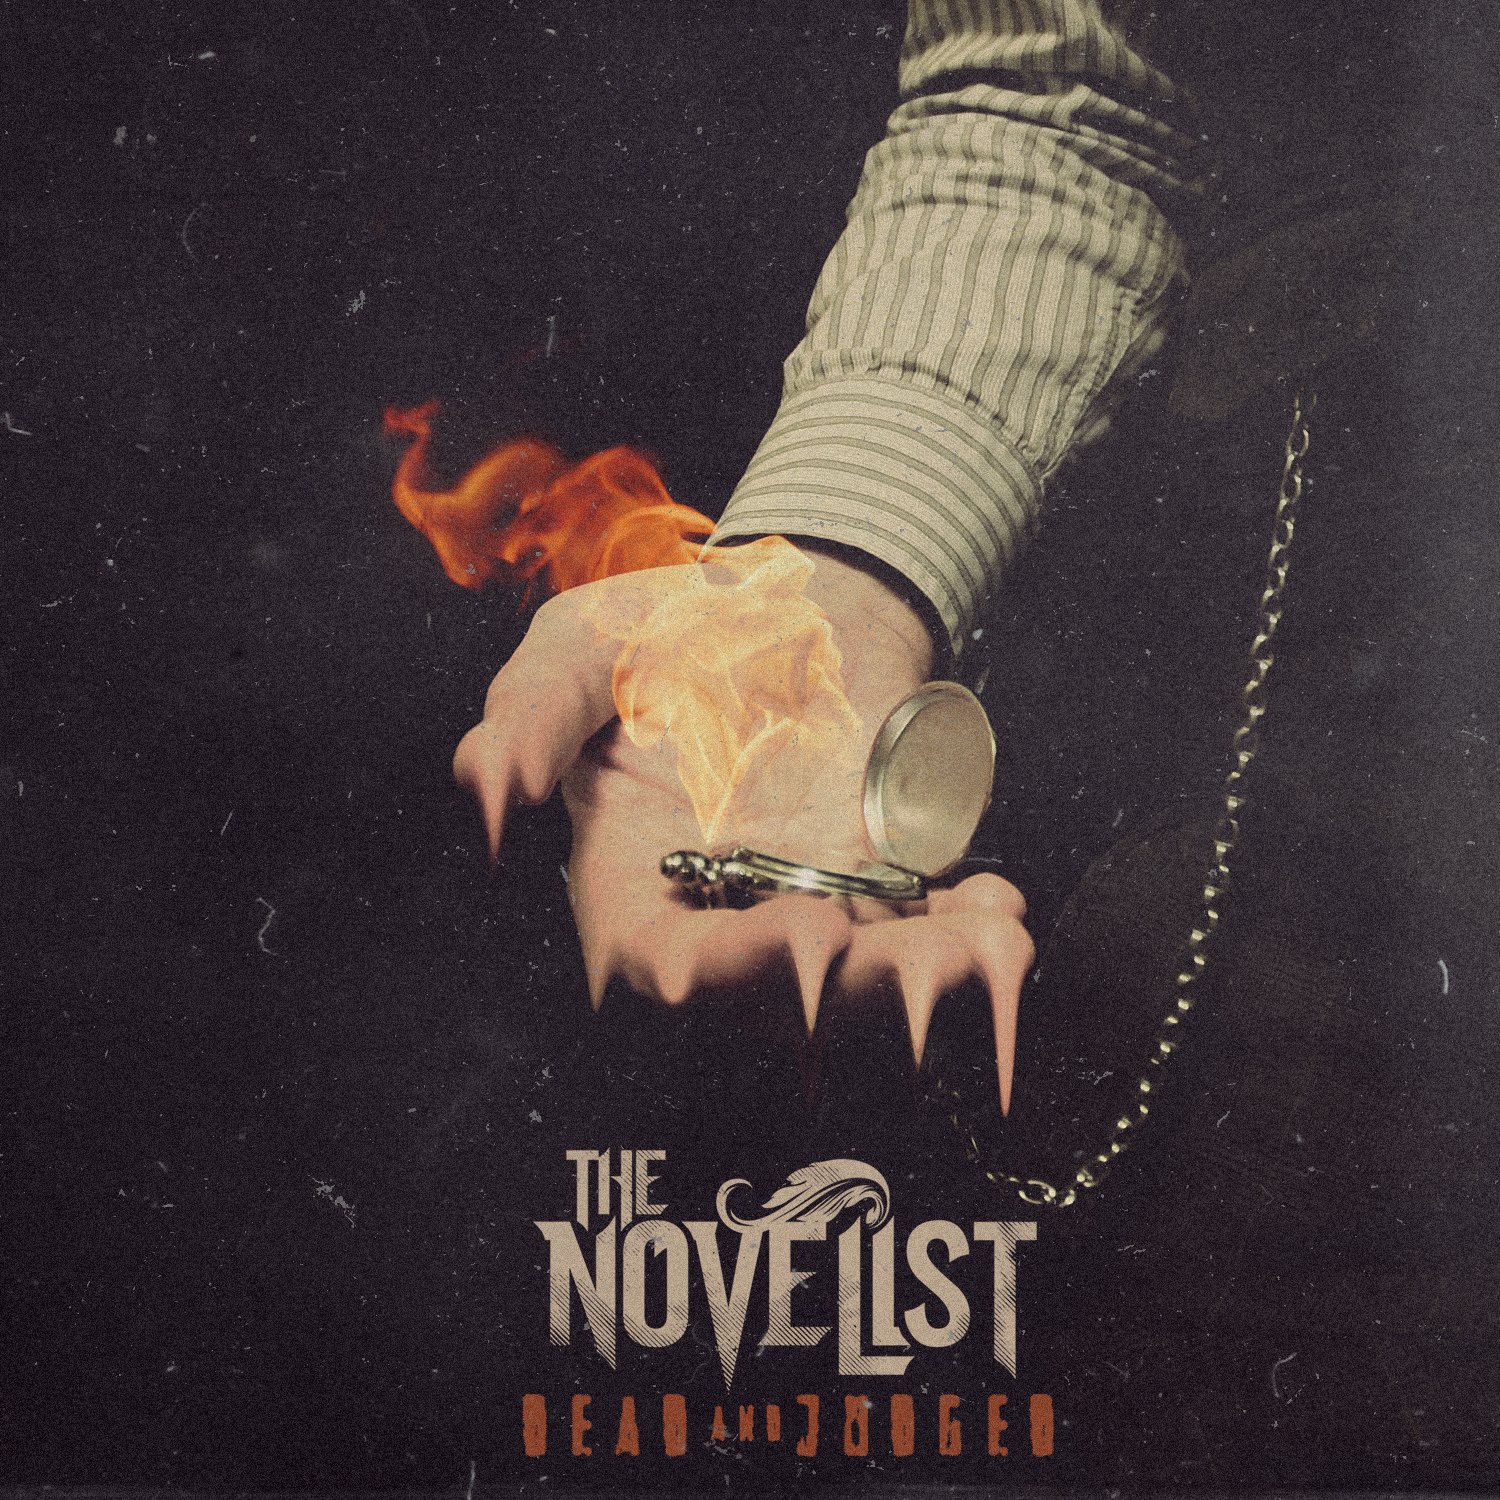 The Novelist - Dead and Judged [EP] (2013)